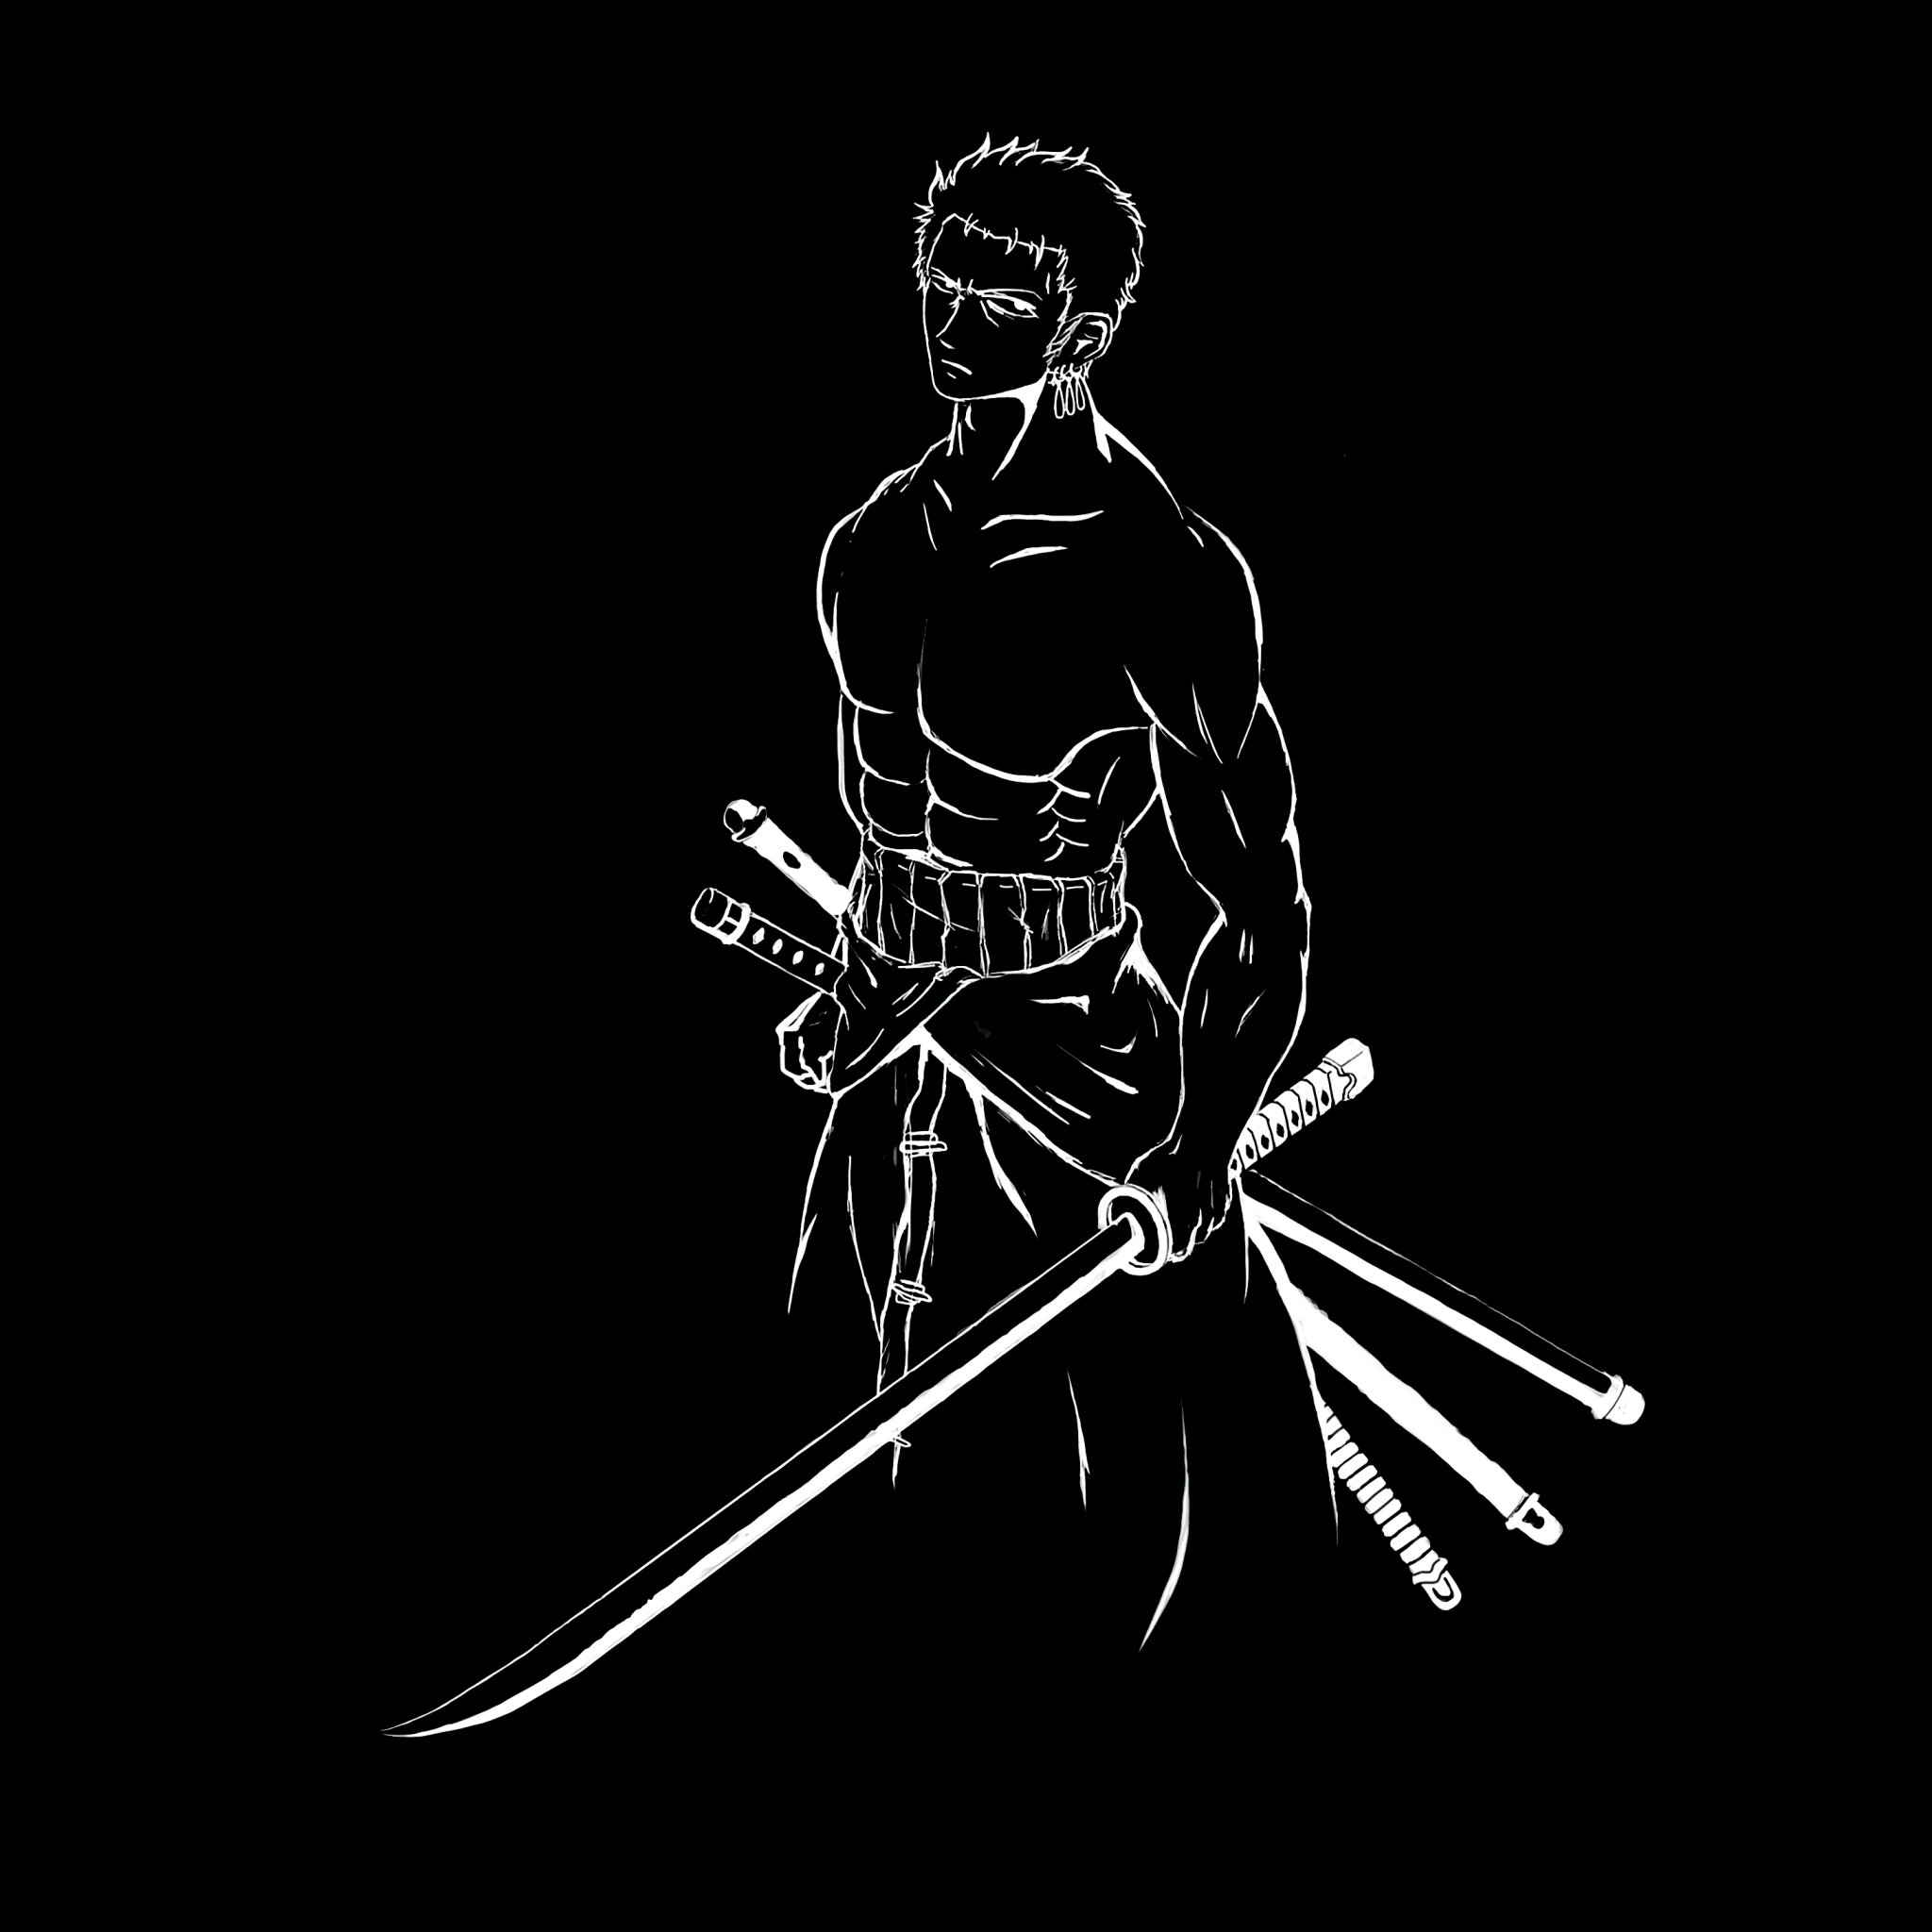 Kolpaper Wallpaper  Zoro Wallpaper Download  httpswwwkolpapercom140858zorowallpaper65 Zoro Wallpaper for mobile  phone tablet desktop computer and other devices HD and 4K wallpapers  Discover more Ashura Fighter Rononoa Sword Zoro 